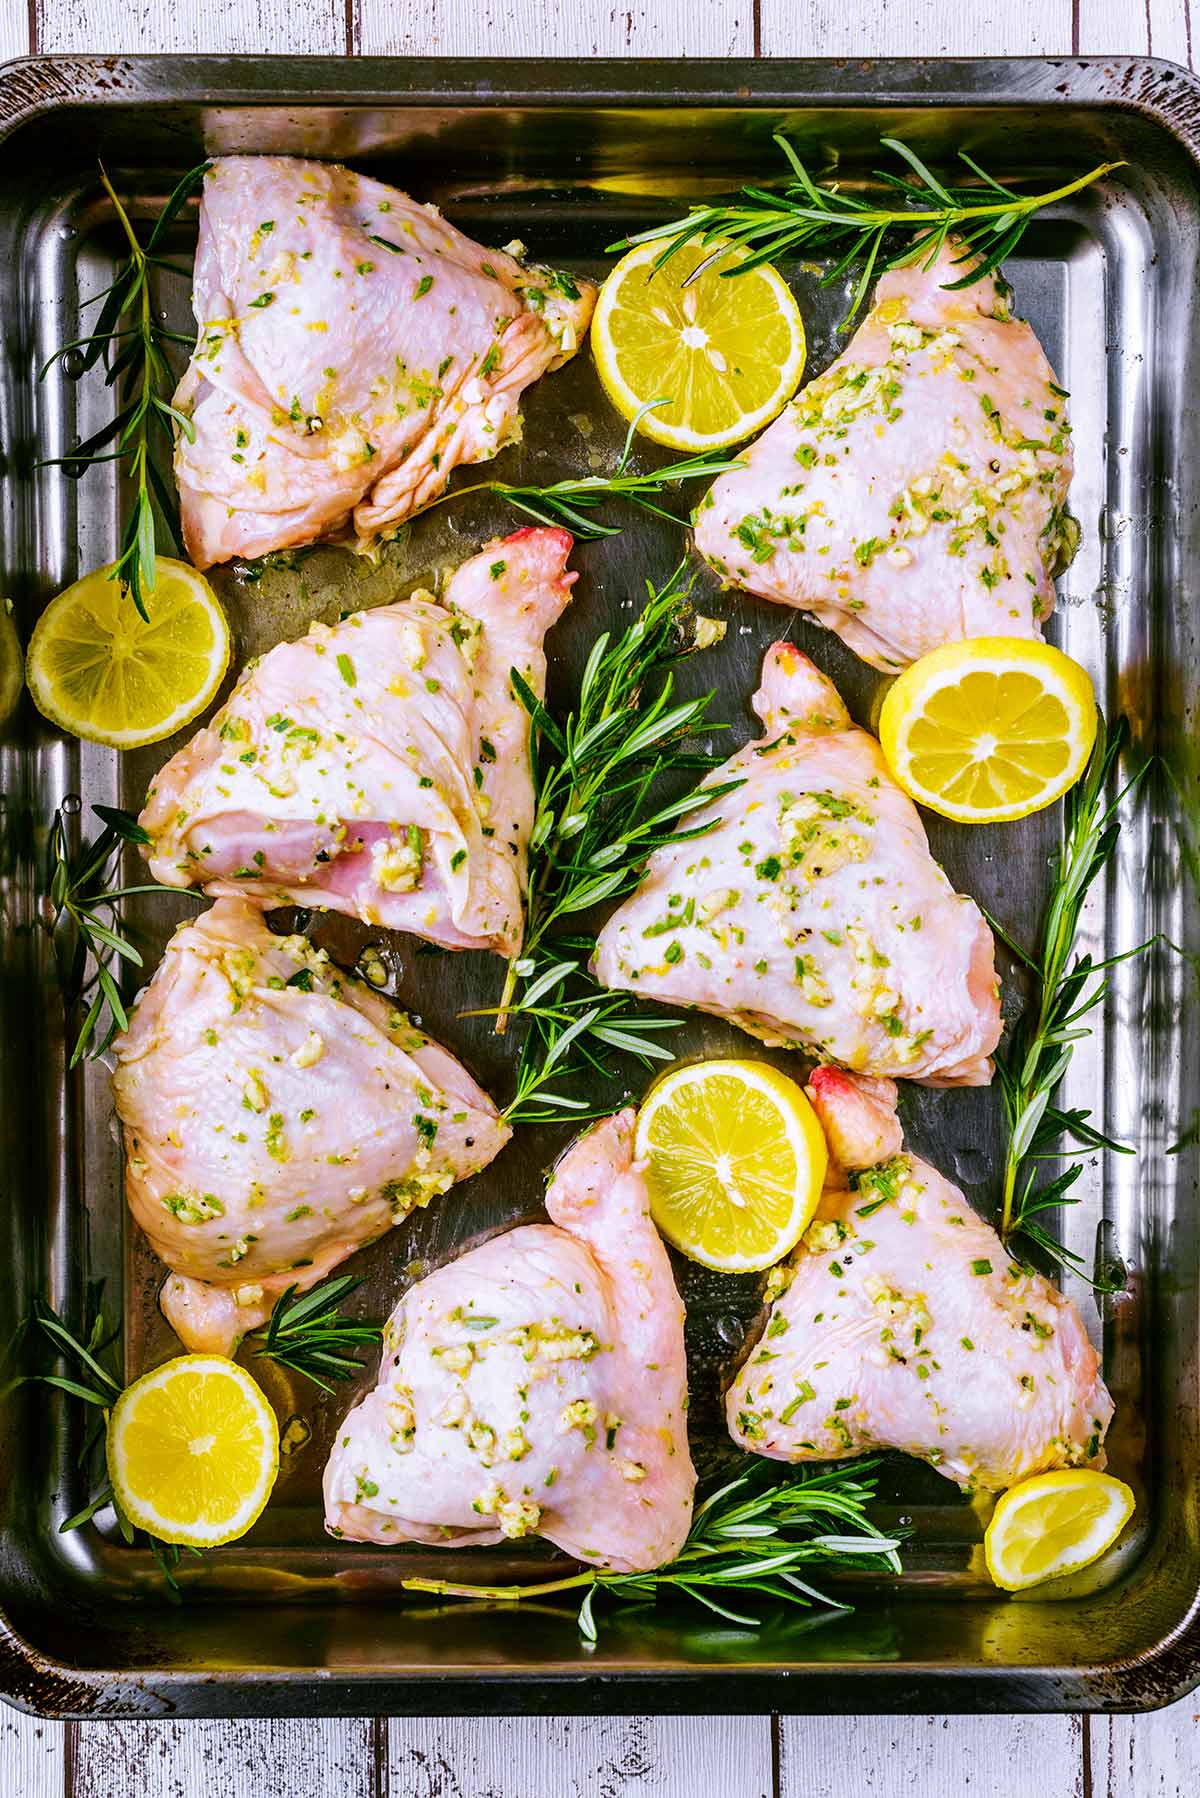 A roasting tin containing chicken thighs lemon slices and sprigs of rosemary.